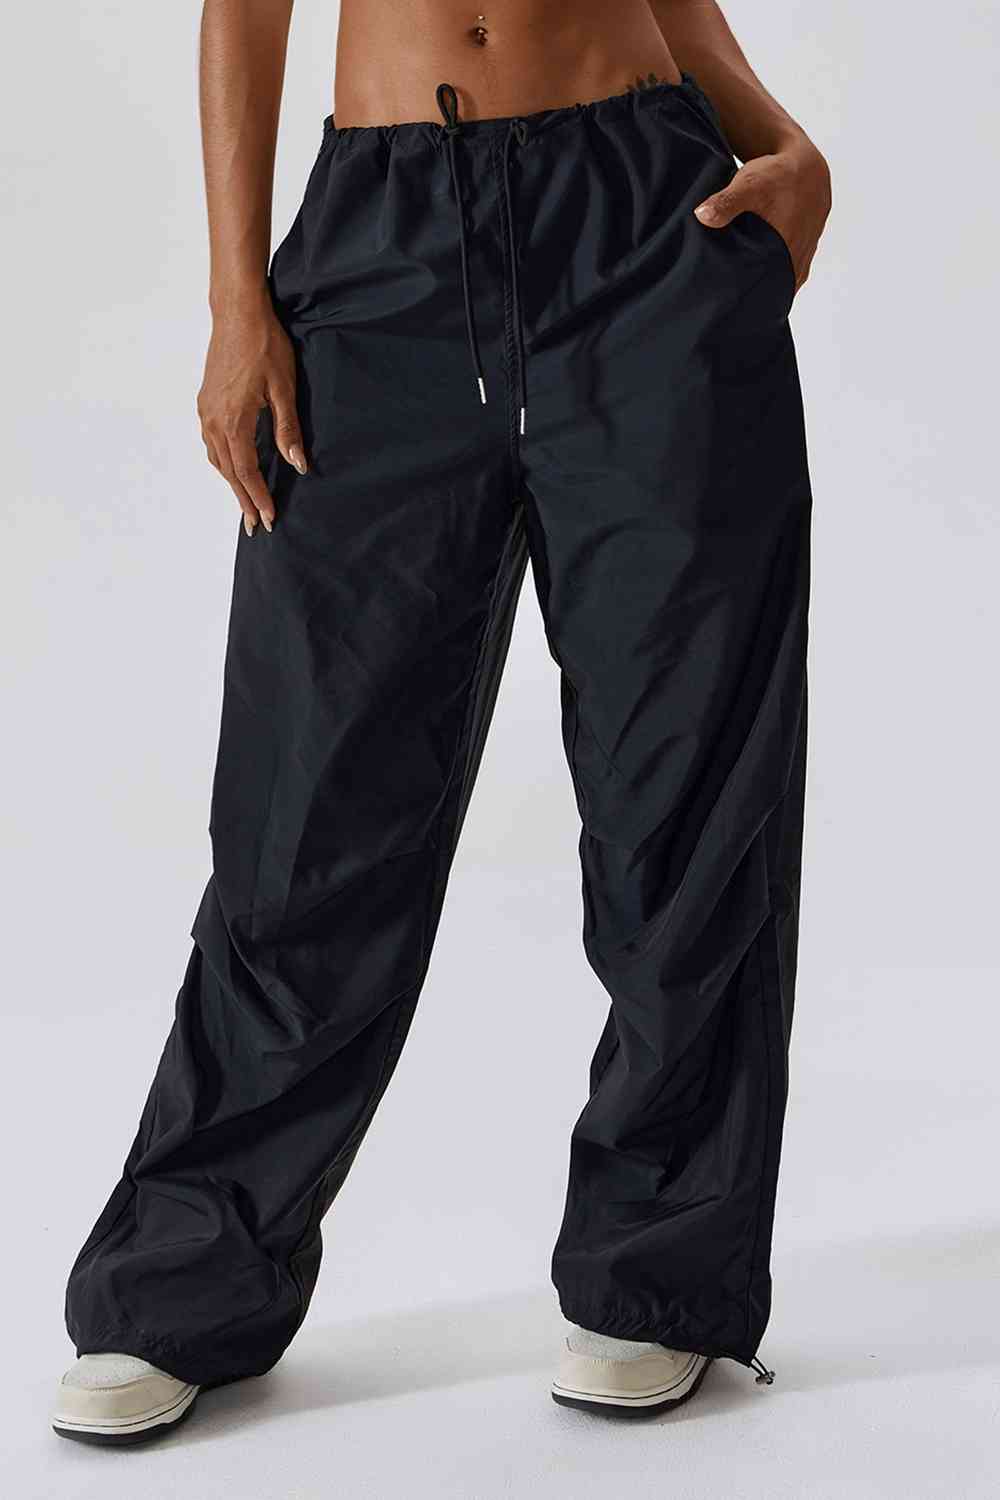 Long Loose Fit Pocketed Sports Pants Black S 